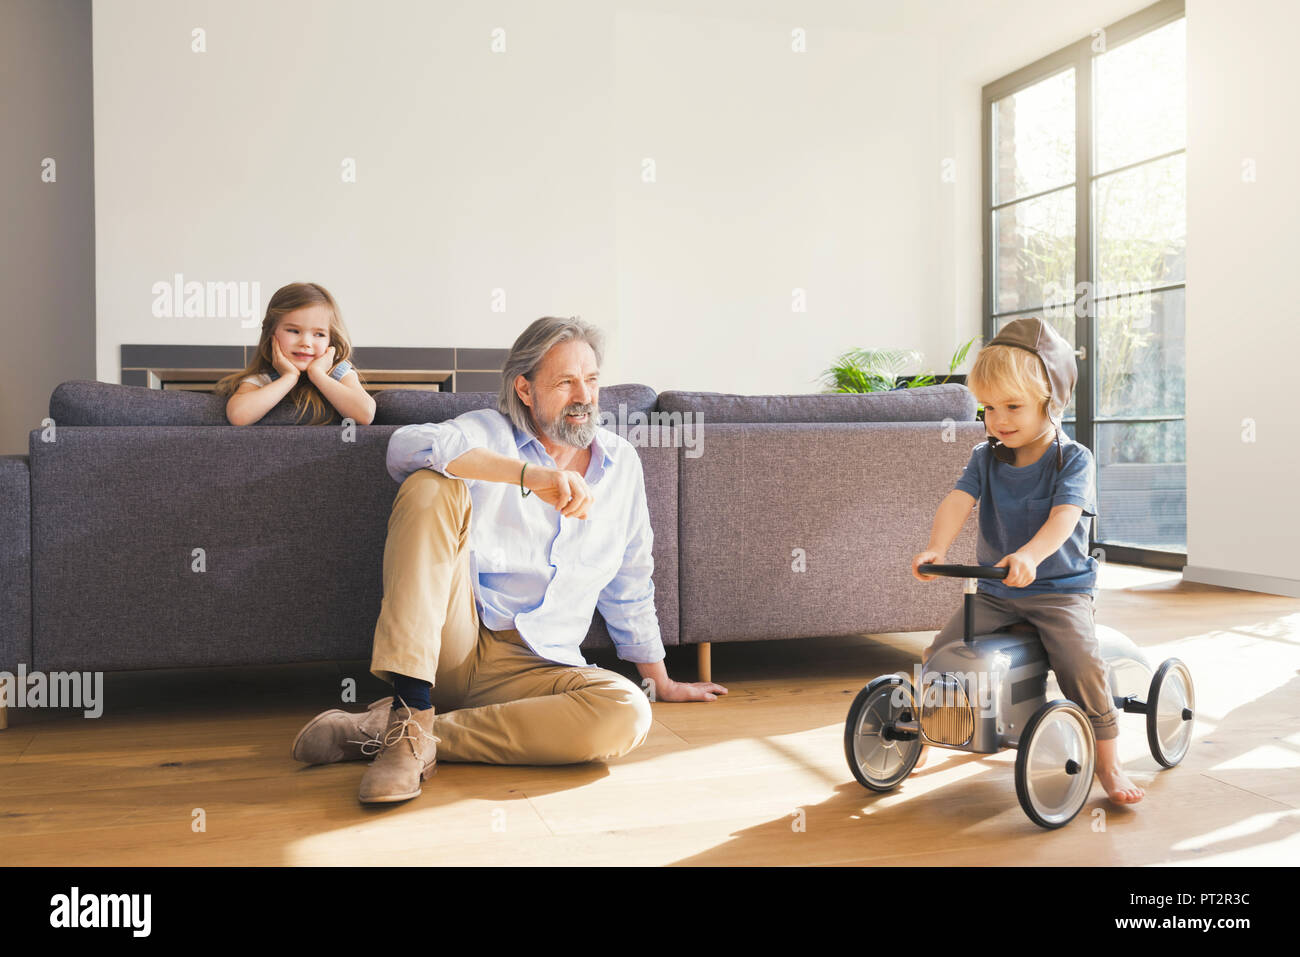 Grandfather playing with grandchildren, sitting on toy car Stock Photo